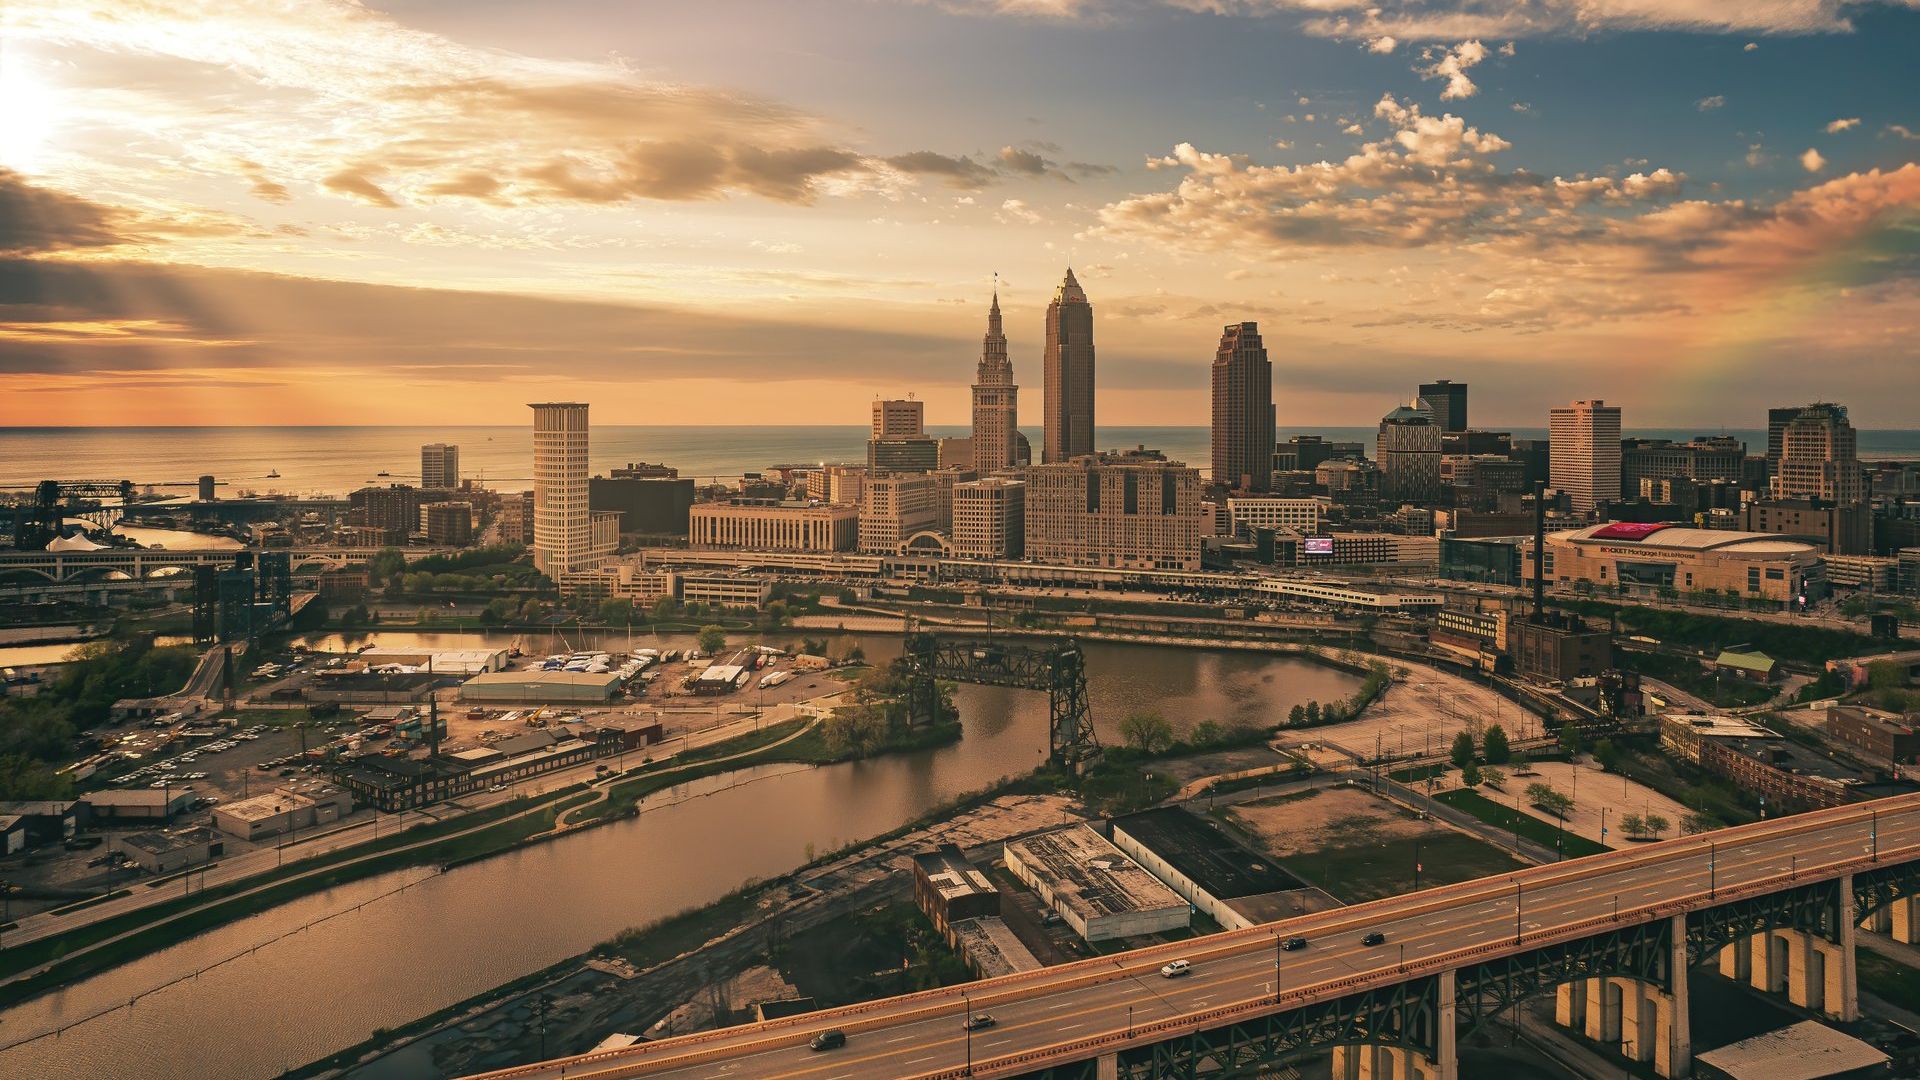 Downtown Cleveland, adjacent to Cuyahoga River, cast in heavenly sunlight 